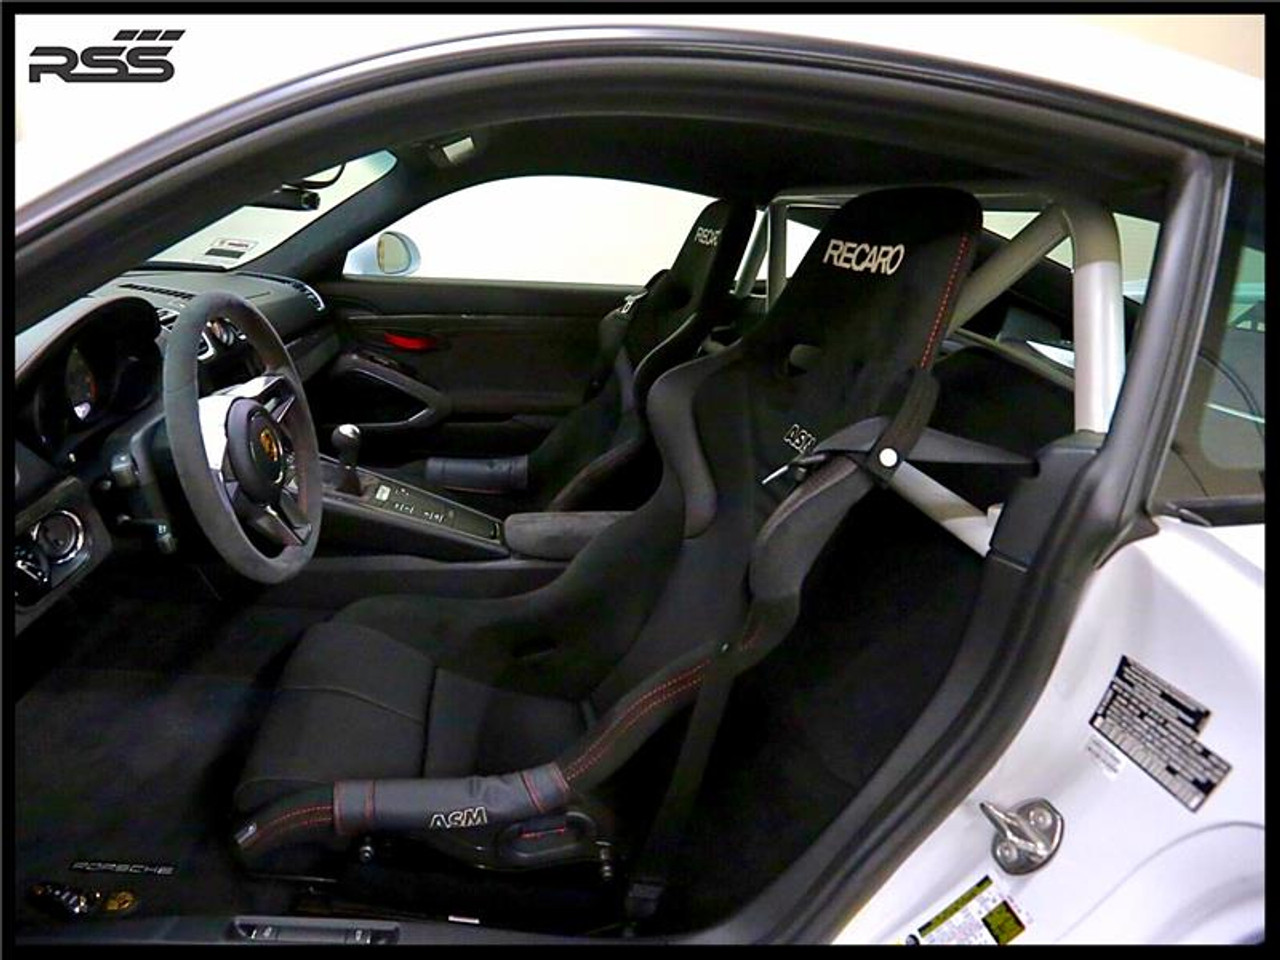 The RSS “951-Hybrid' Series 2pt Harness Bar (Uncoated - Raw) for 981 Cayman / GT4 / 718, is Engineered to maximize function, add rigidity, minimize added weight (+20 lbs), offer generous occupant seating space and integrate with interior. The Bar is a safety inspired design which secures safety harnesses directly behind the occupants shoulders. A one piece main hoop mounts to the chassis cross member and features a Straight Top Tube for a stronger main hoop. Diagonal Tubes provide additional structural support without obstructing the drivers rearward visibility. The Bar allows generous seat base travel with standard, OE bucket or racing bucket seats. Retains use of factory seat belts. Bolt-In installation, carpet, panel and tab trimming is required, Professional installation is recommended for a factory installed look. Designed, constructed and powder coated at RSS utilizing 1.50 inch DOM with precision cut reinforced mounting plates. Patent Pending Design